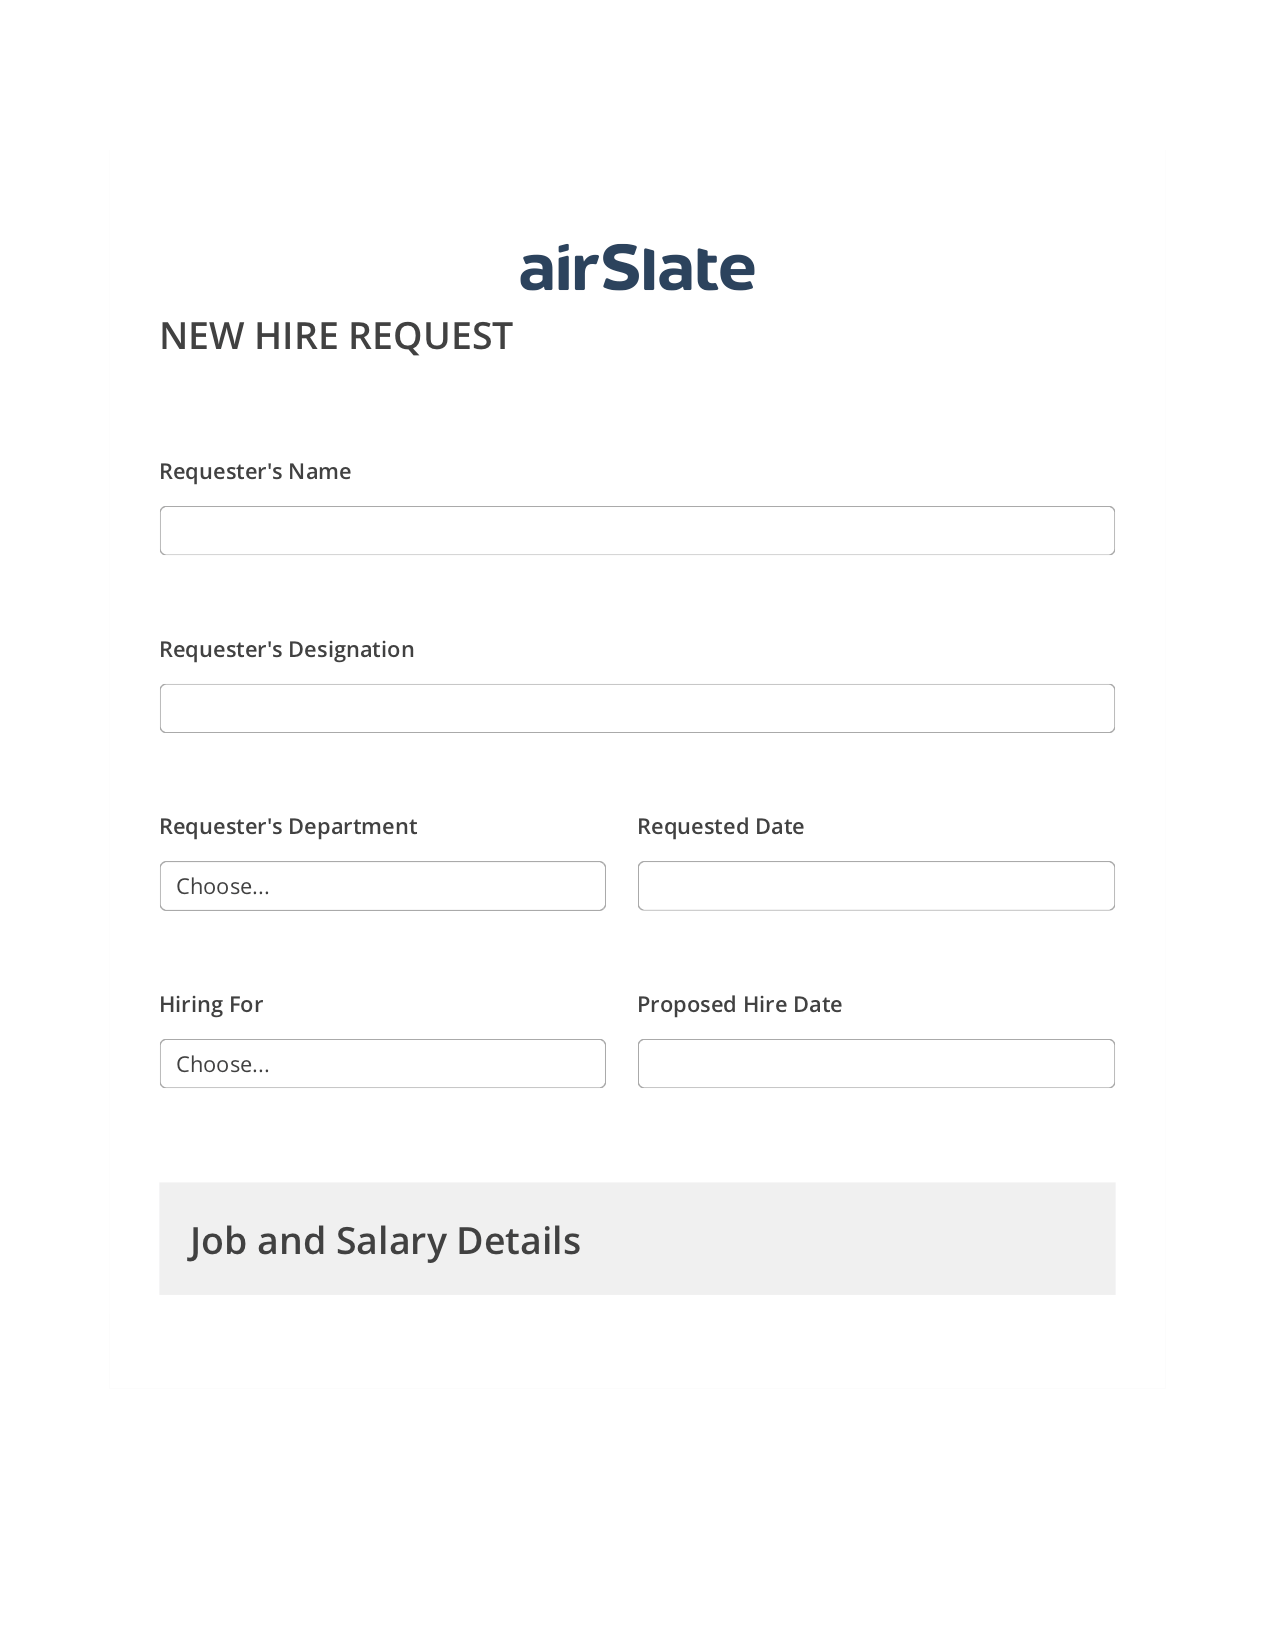 Multirole Hiring Request Workflow Pre-fill from MS Dynamics 365 Records, Send a Slate with Roles Bot, Export to MySQL Bot